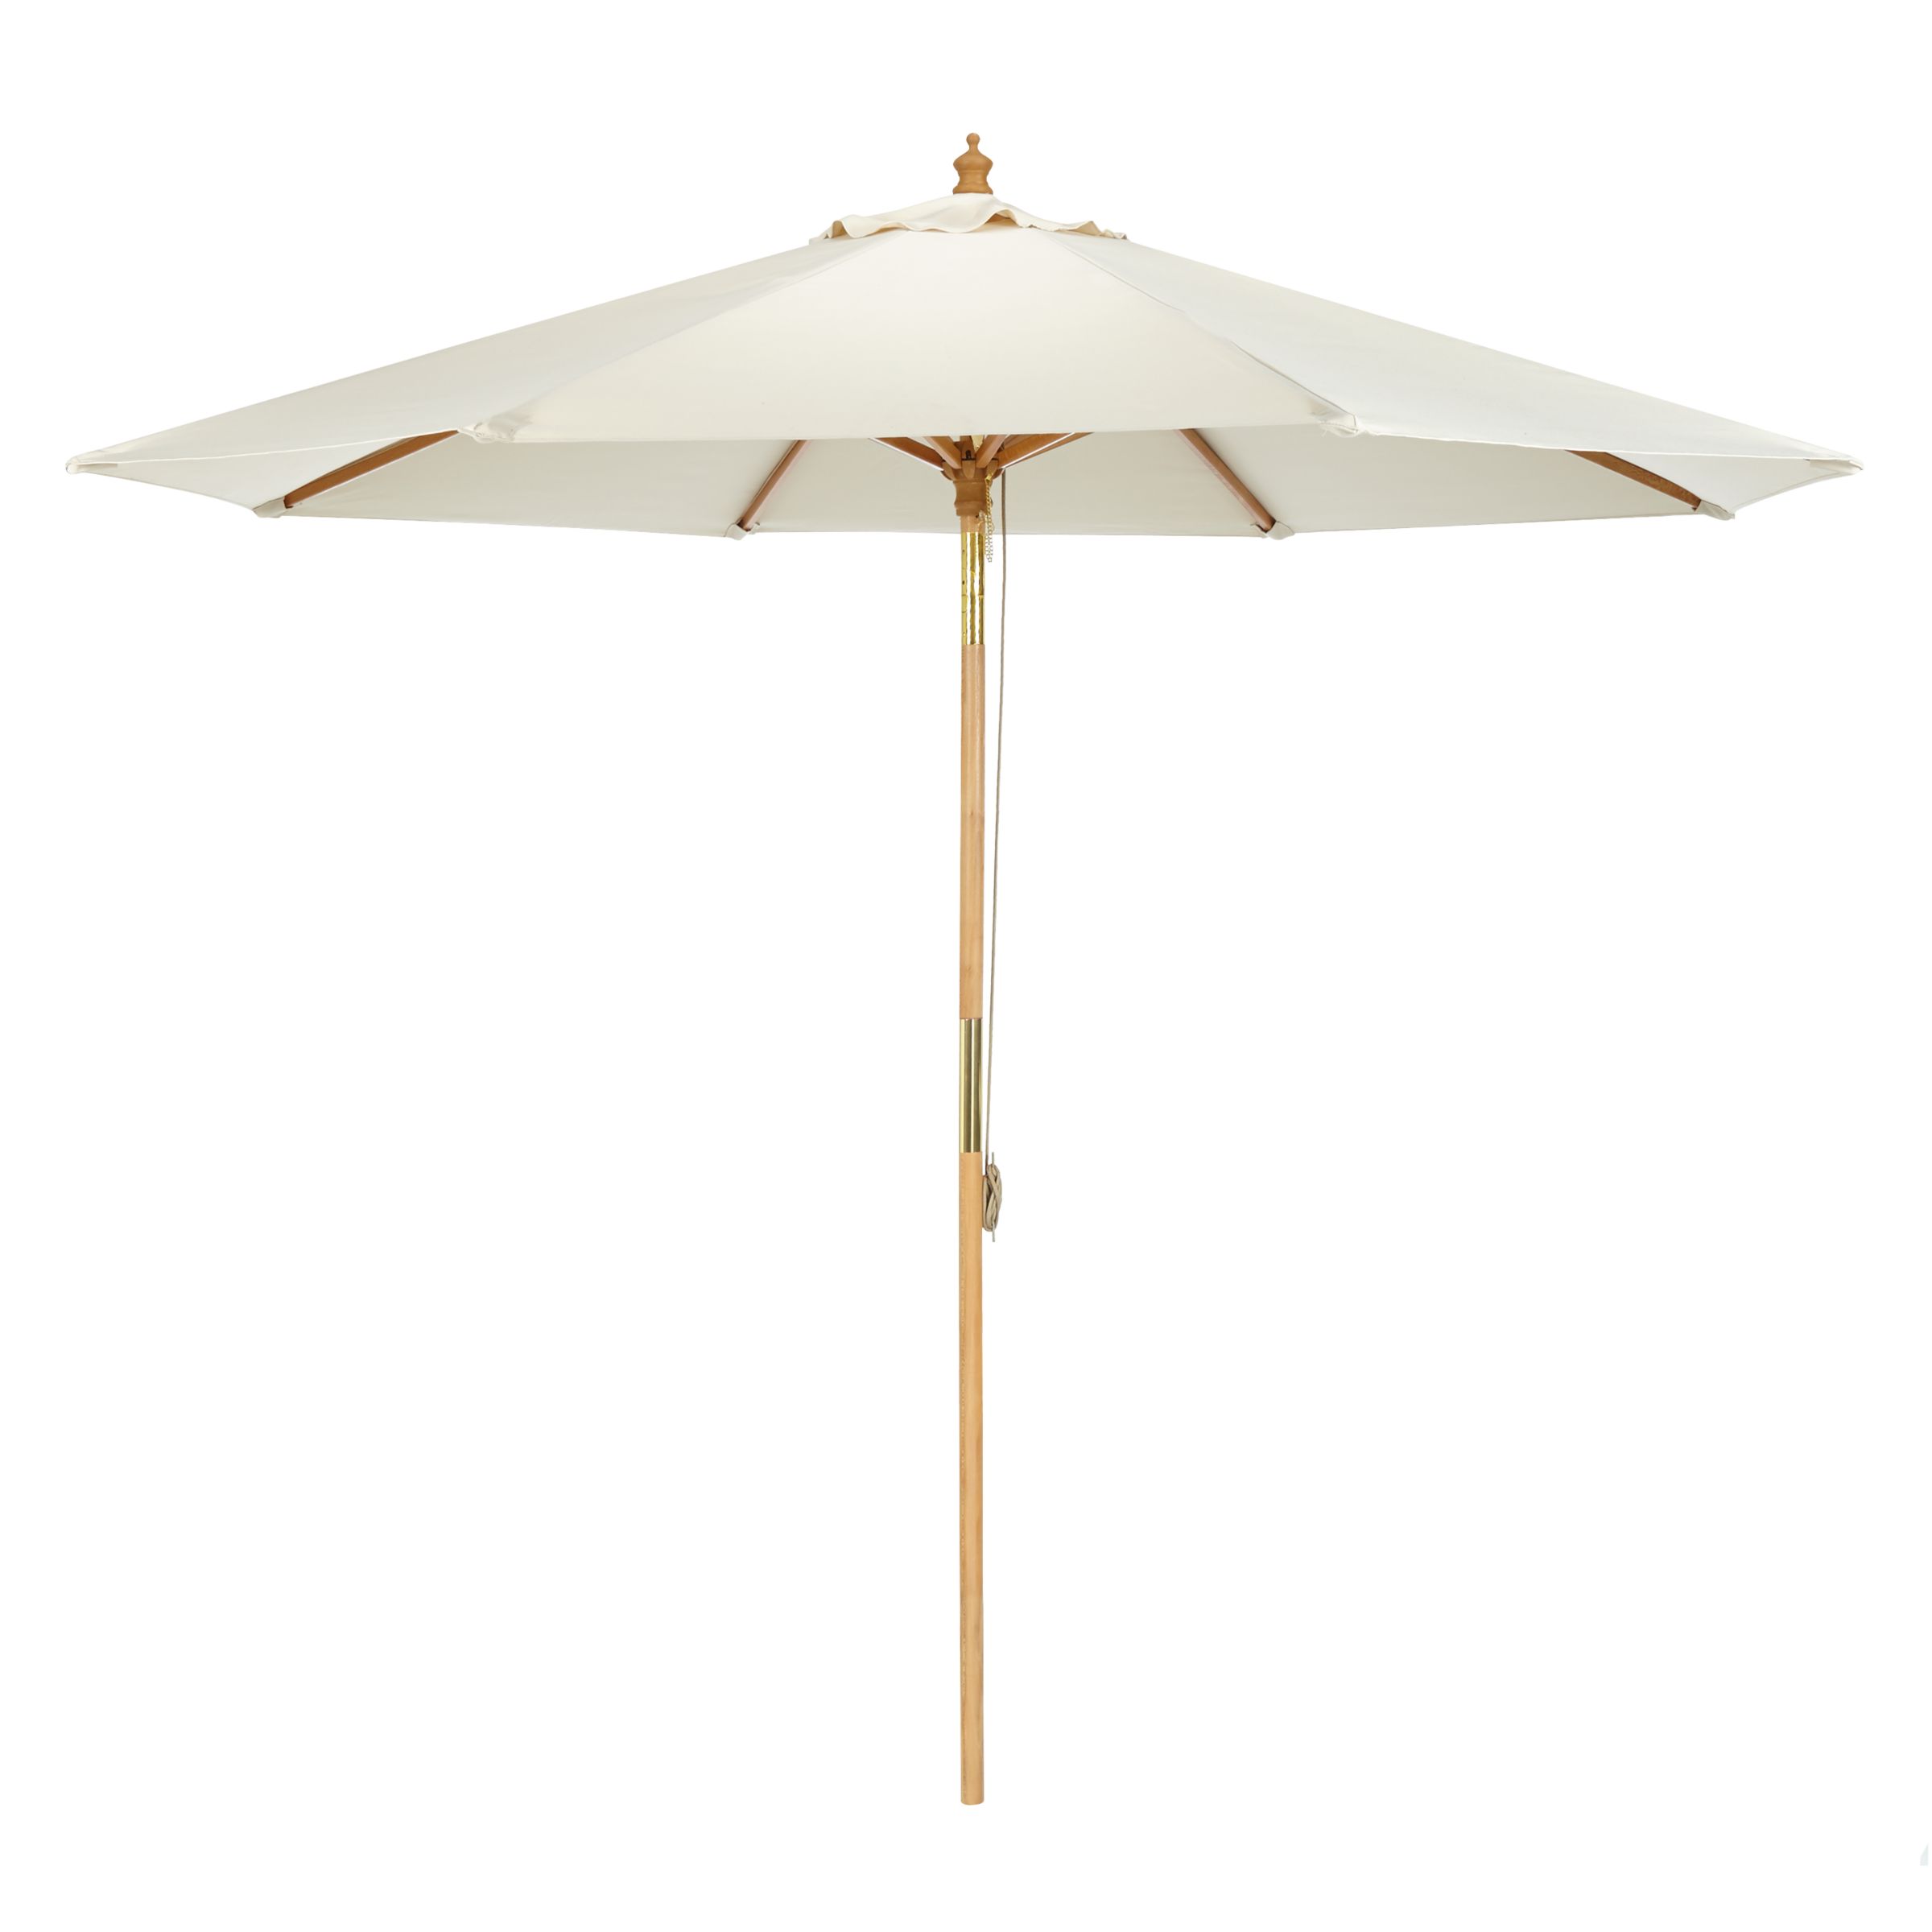 John Lewis 2.75m Wooden Parasol, FSC-Certified (Sycamore), Oyster